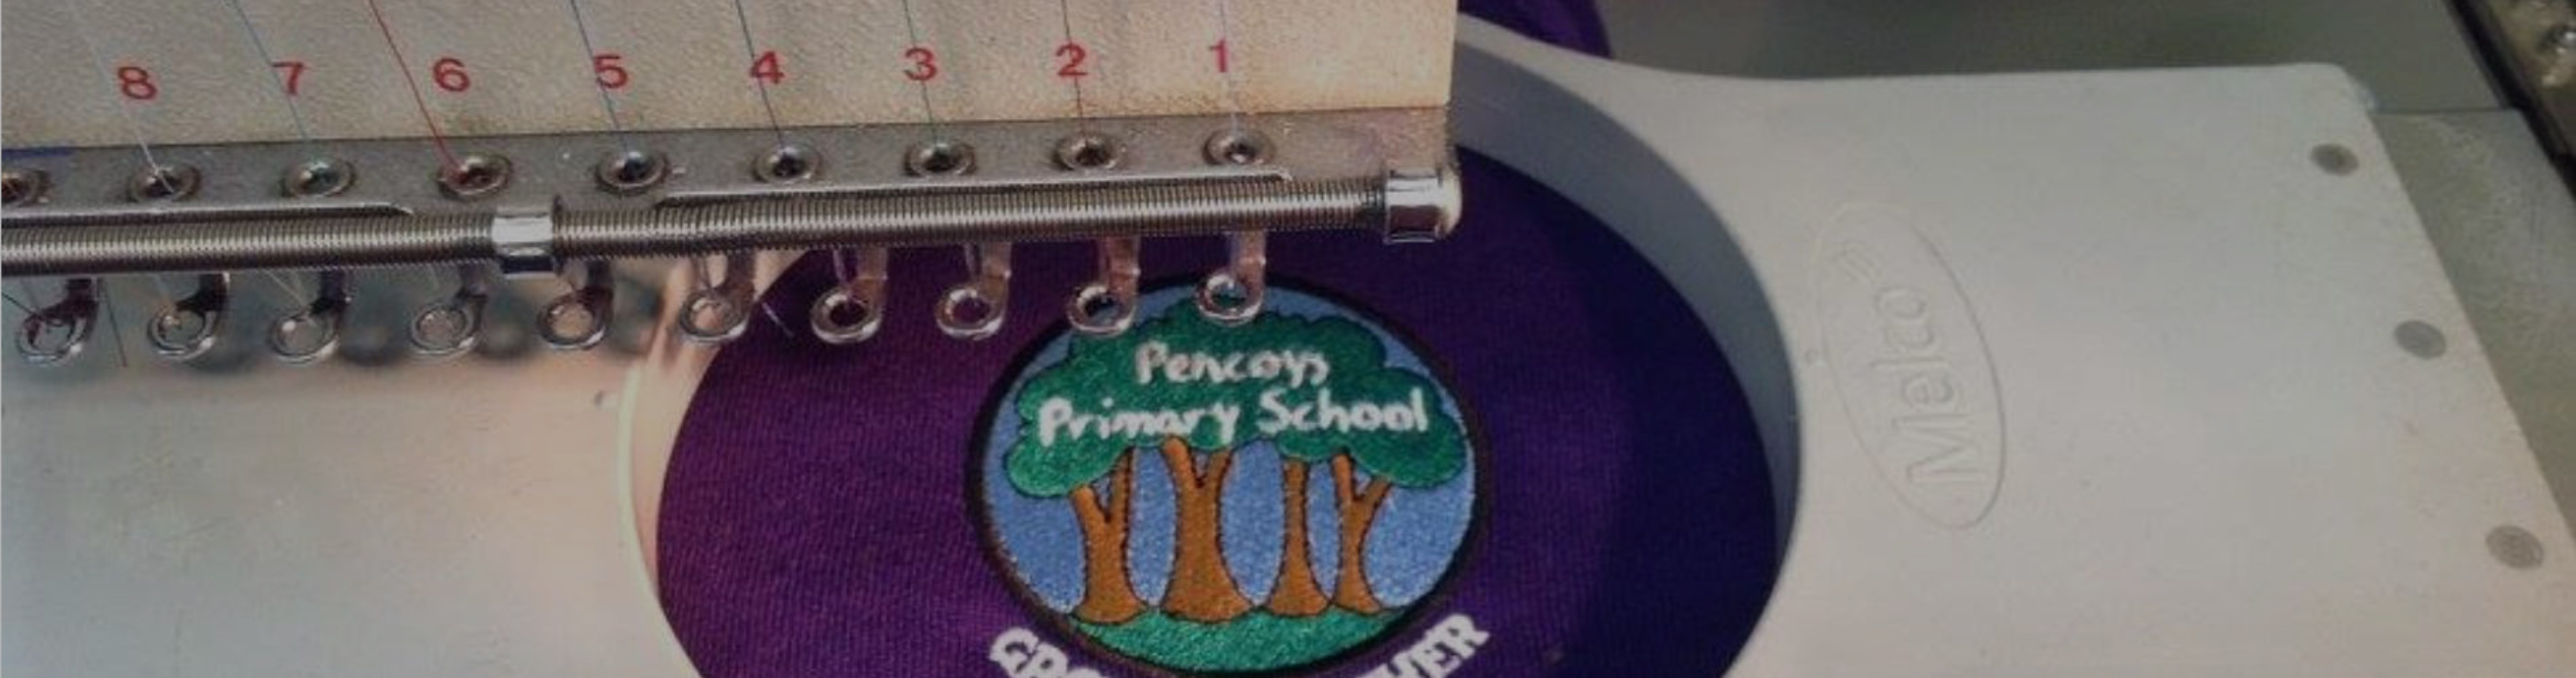 Embroidery banner